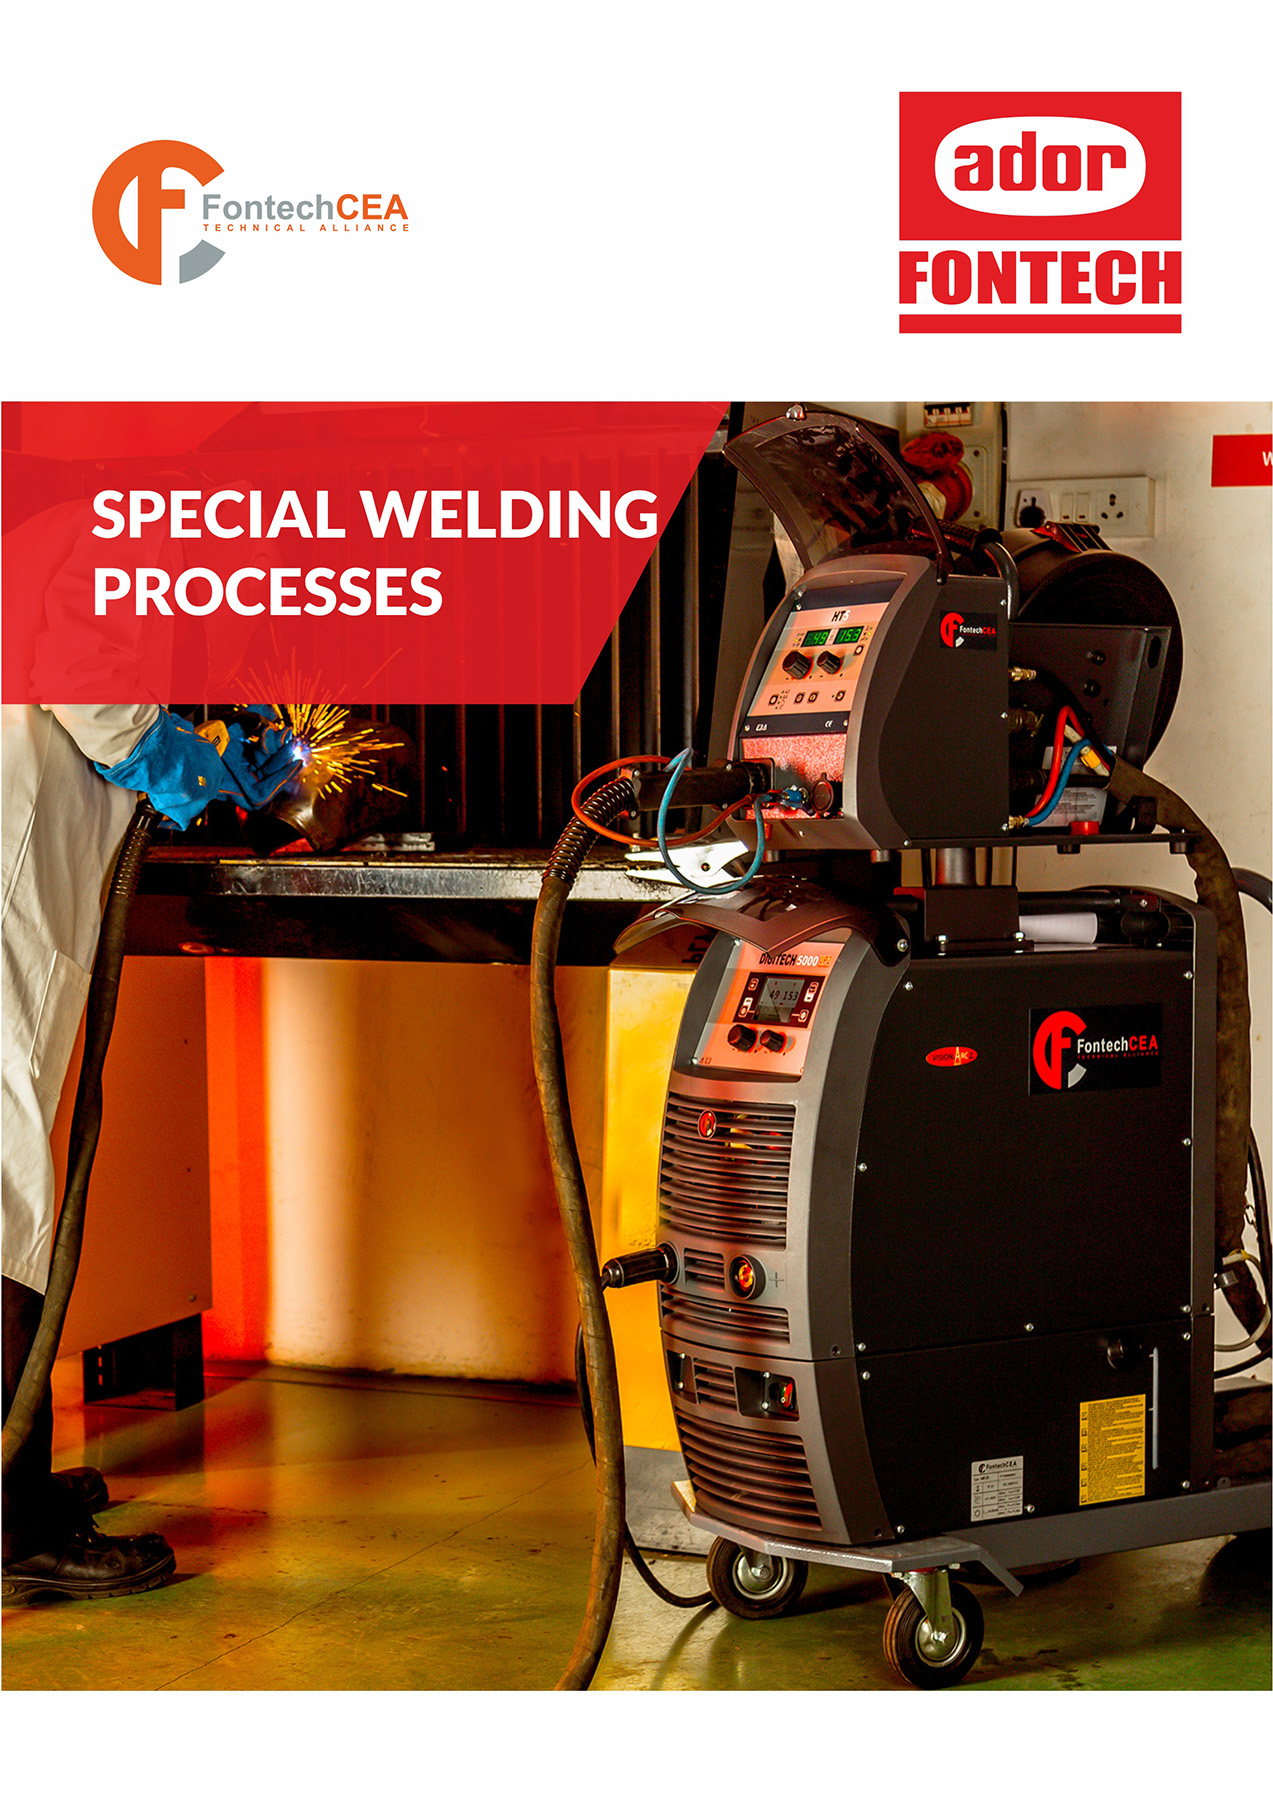 SPECIAL WELDING PROCESSES